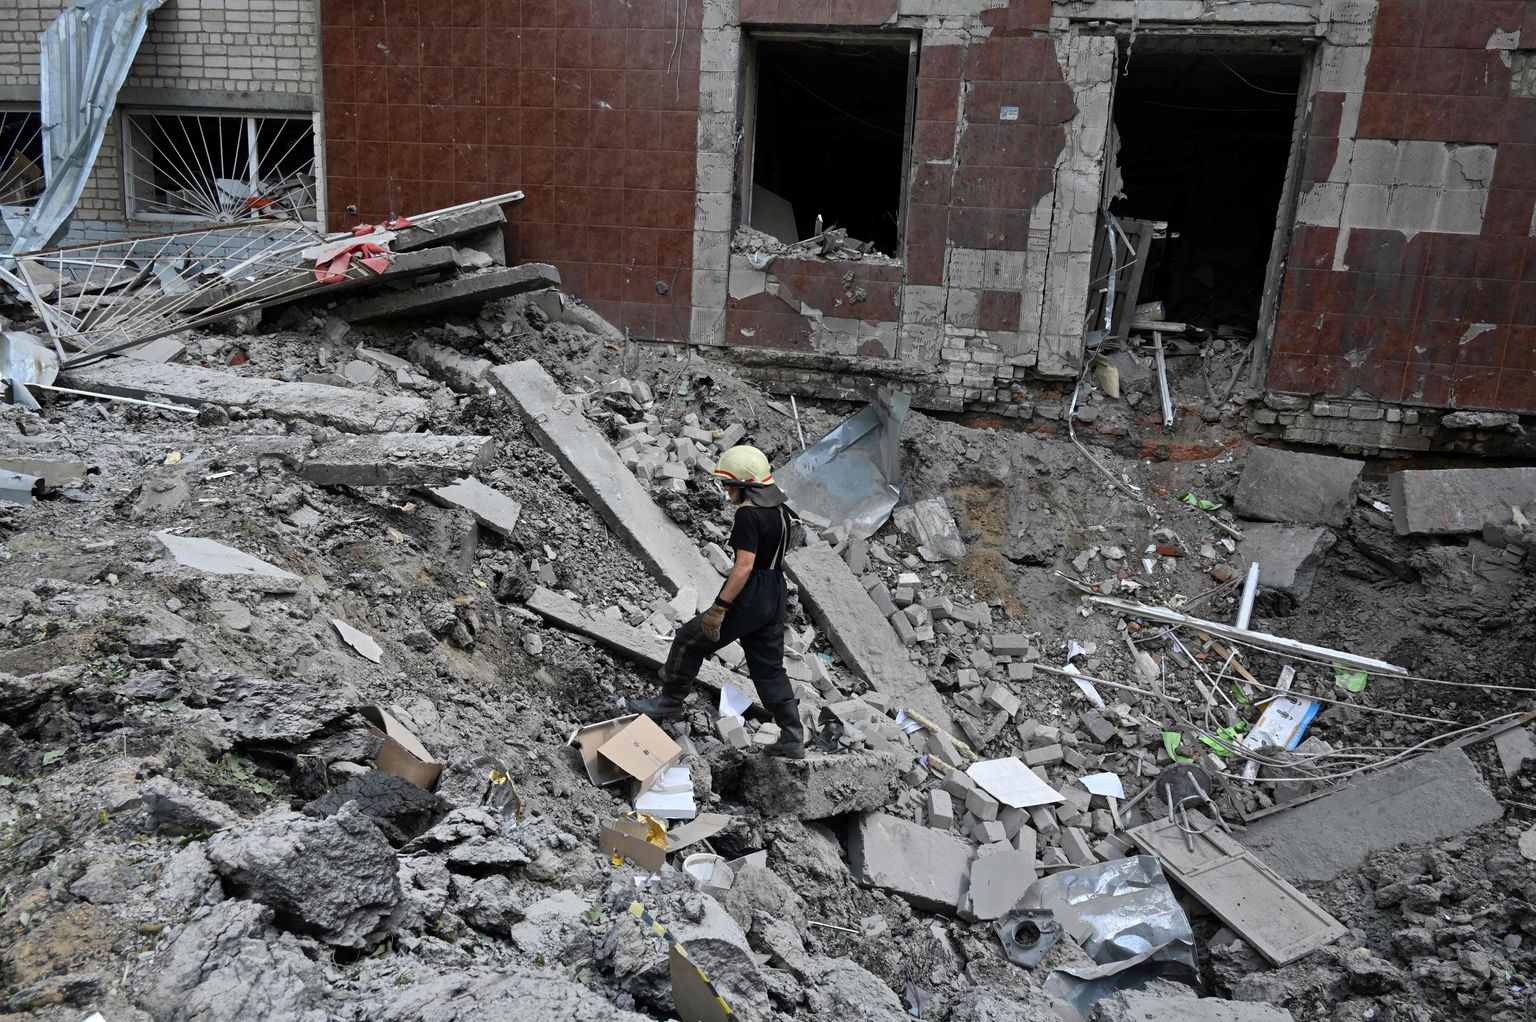 A rescuer stands in a crater in the ruins of a school building, partially destroyed by two rockets in the Ukrainian city of Kharkiv on June 28, 2022. (Photo by SERGEY BOBOK / AFP)